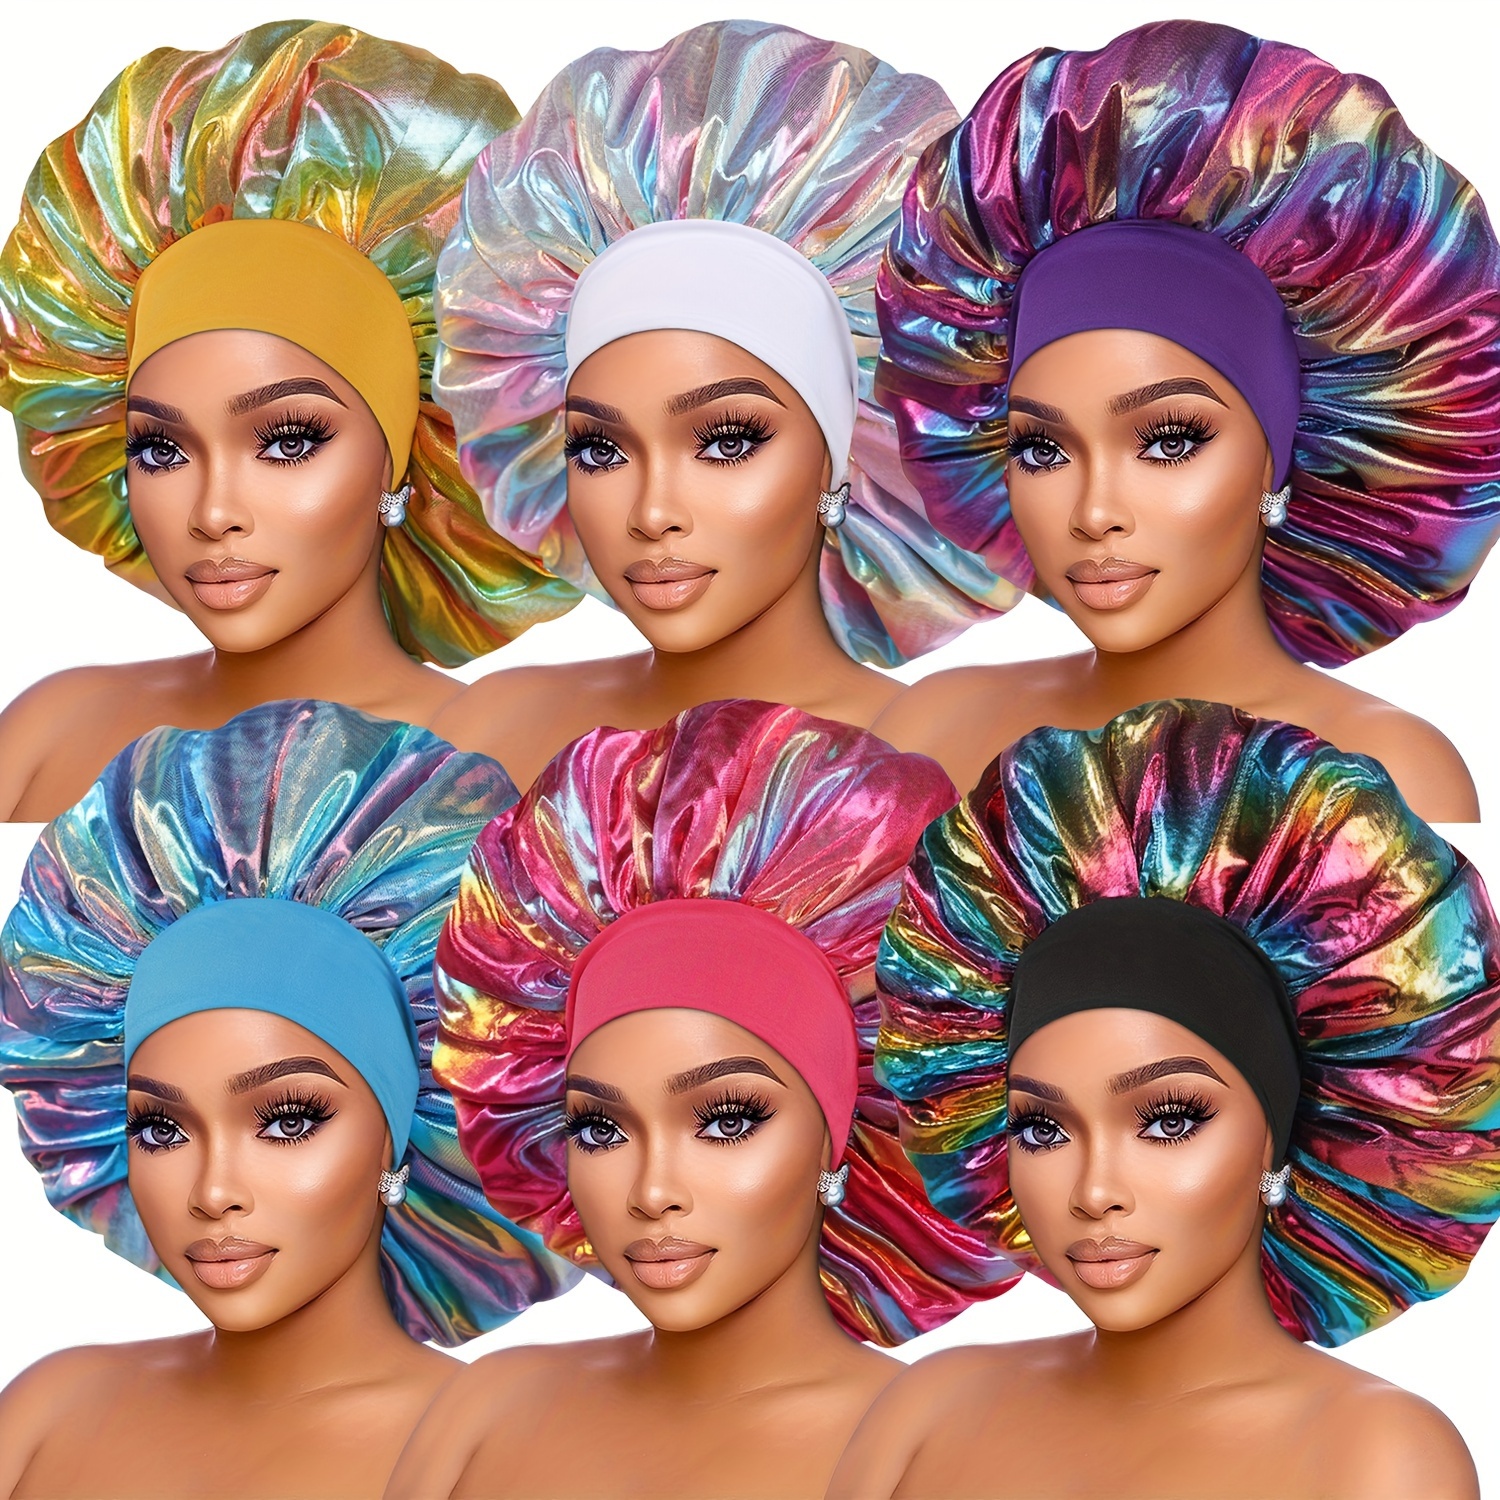 

6/4/2pcs Laser Pattern Hair Bonnet For Sleeping, Shower Cap With Wide Elastic Band, Sleep Cap Hair Protection Cap For Curly Hair Natural Hair - Bathroom Accessories